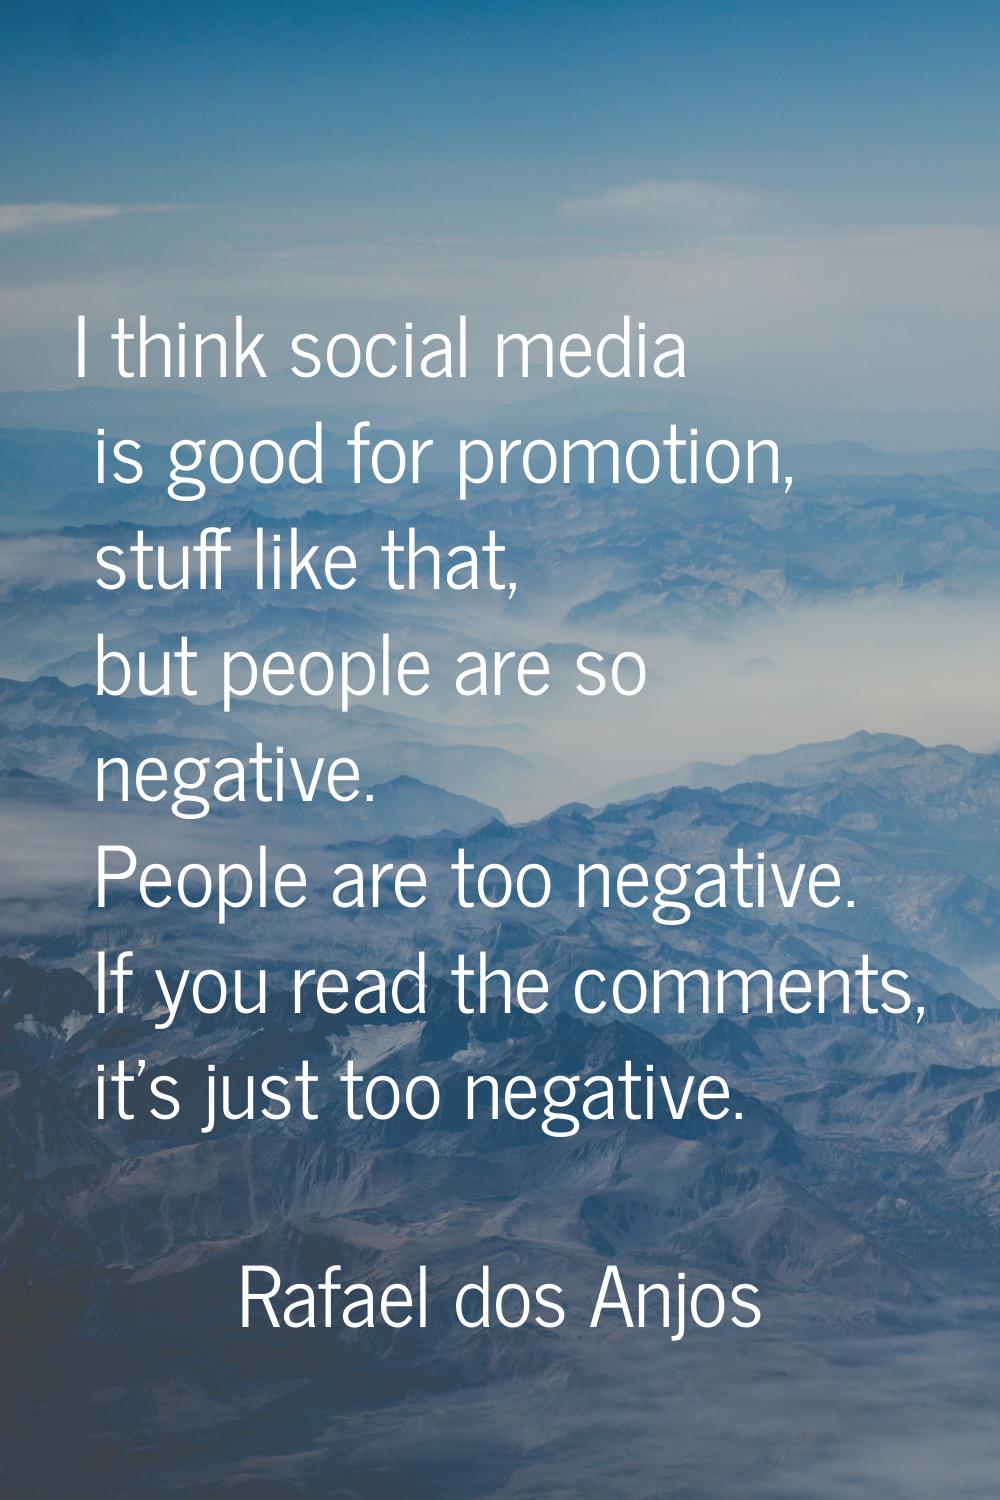 I think social media is good for promotion, stuff like that, but people are so negative. People are